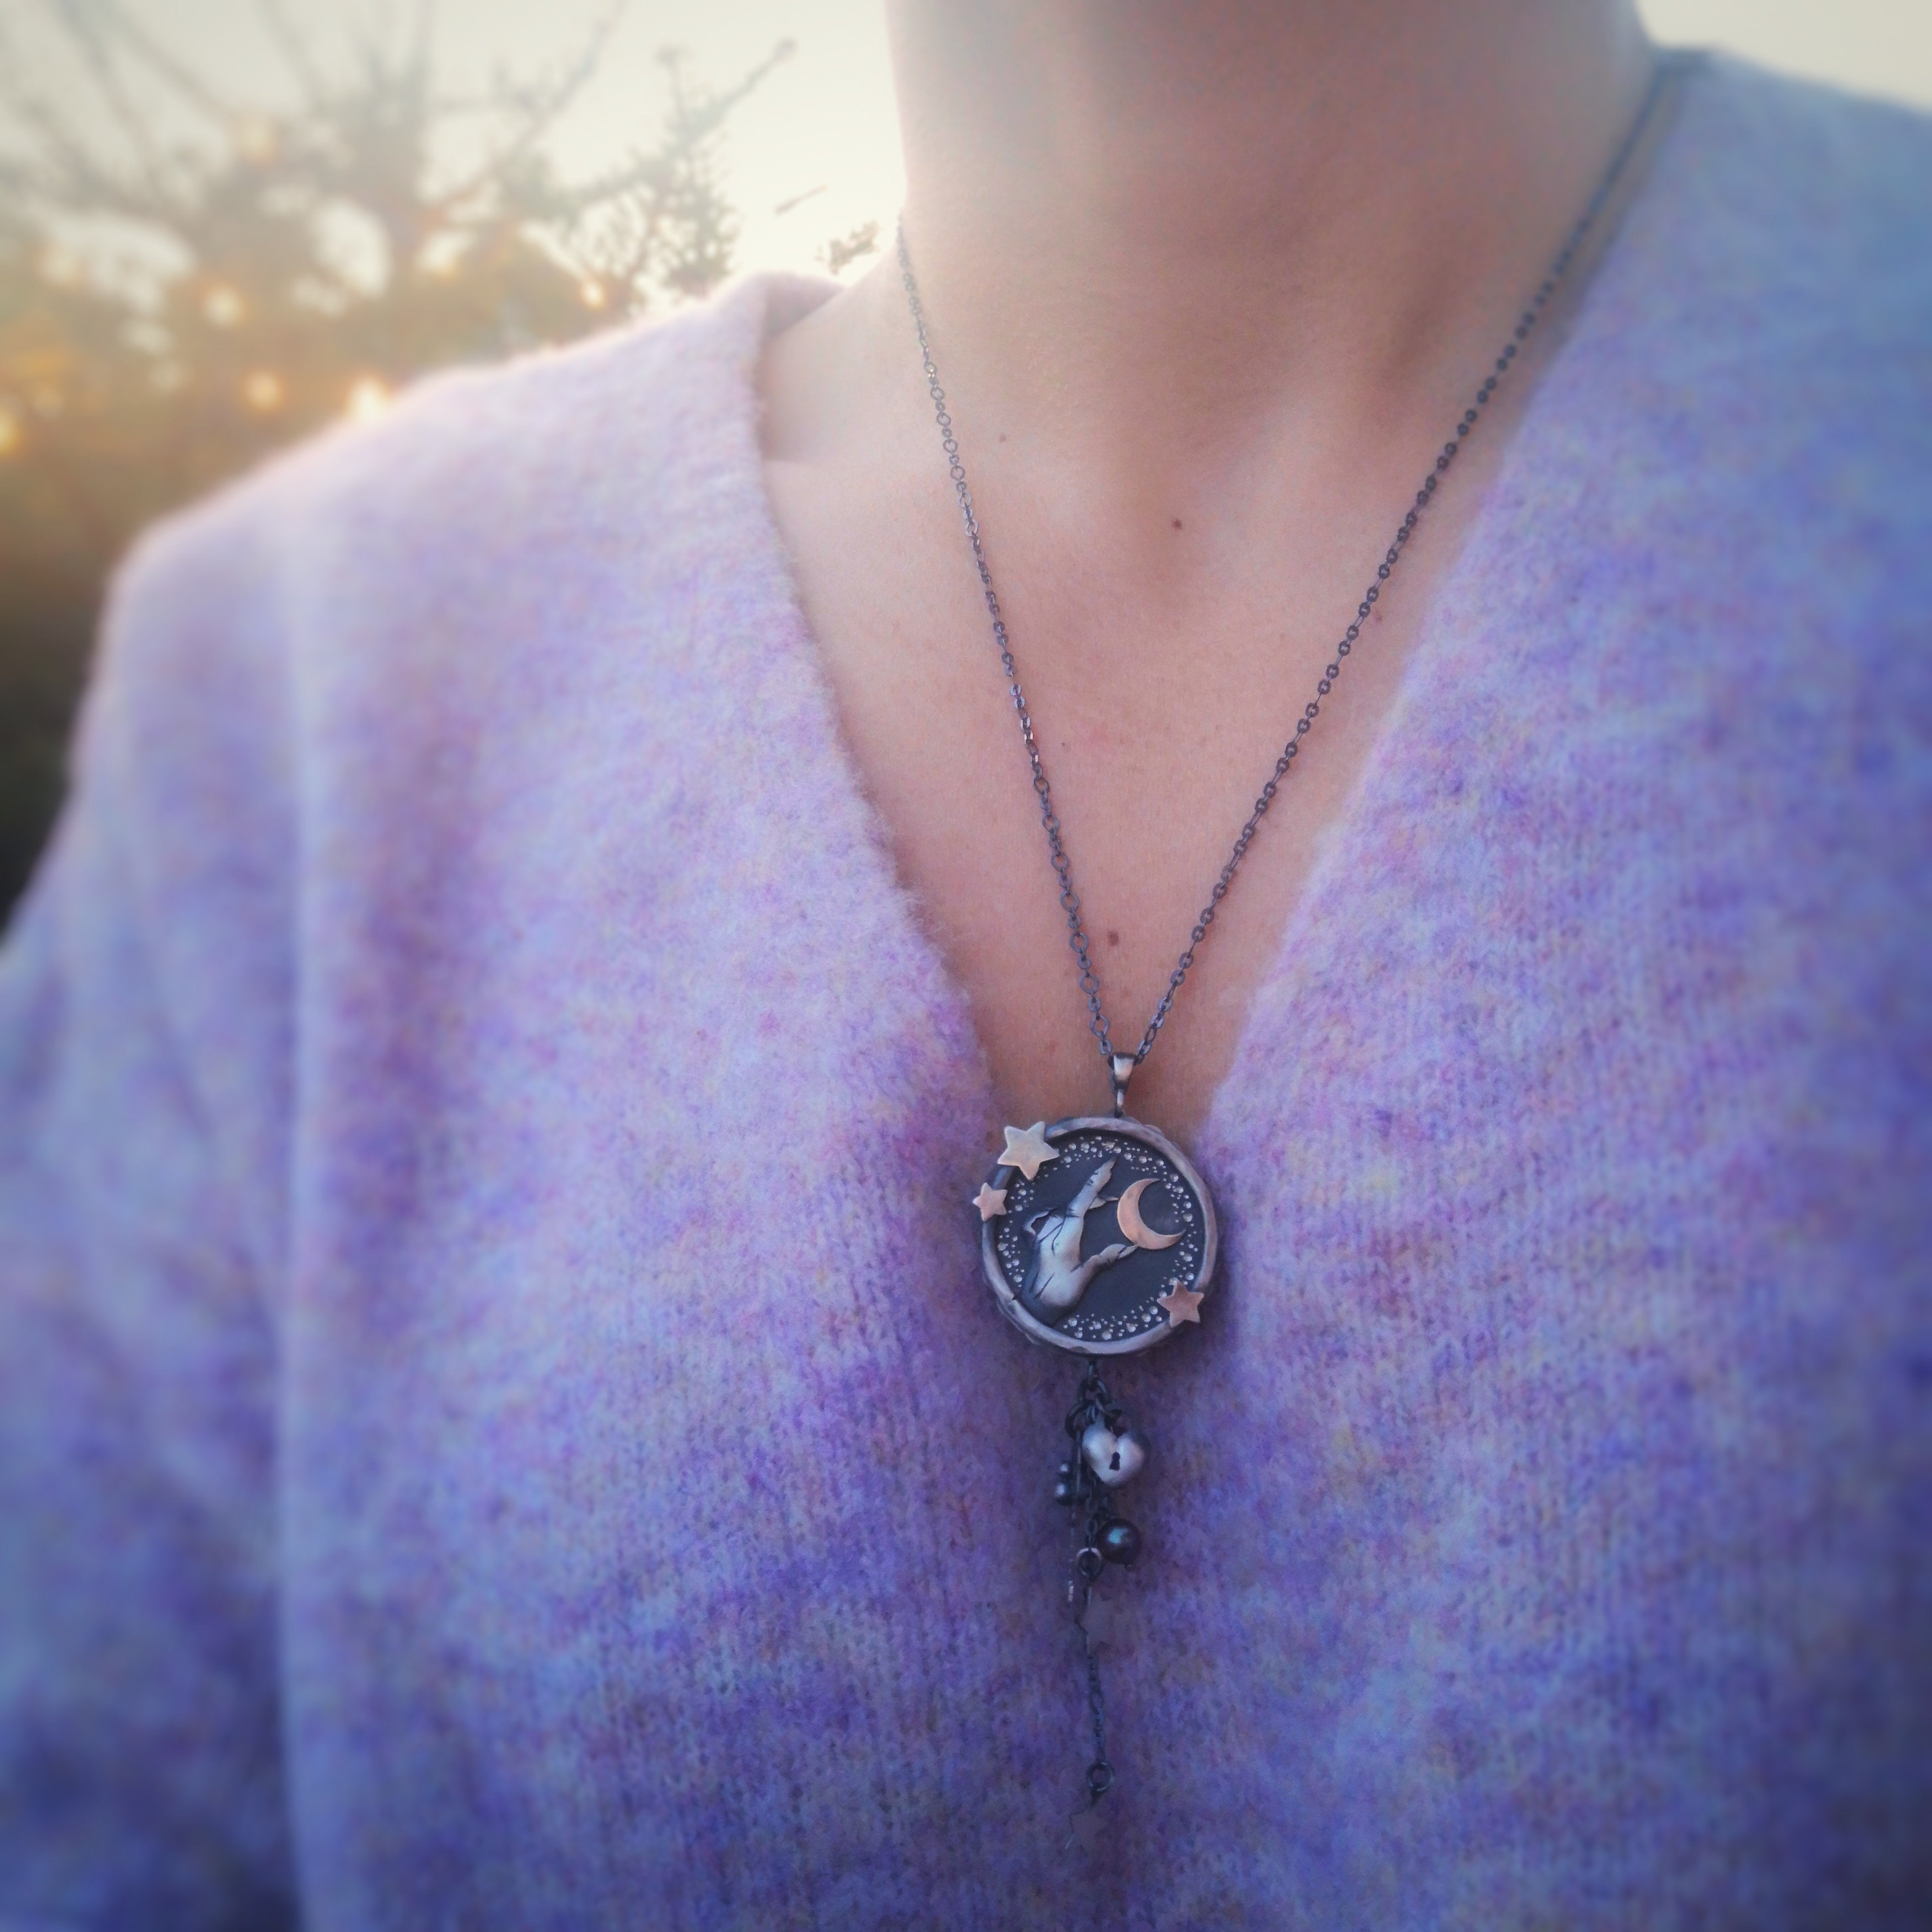 The Moon Goddess Lariat Necklace